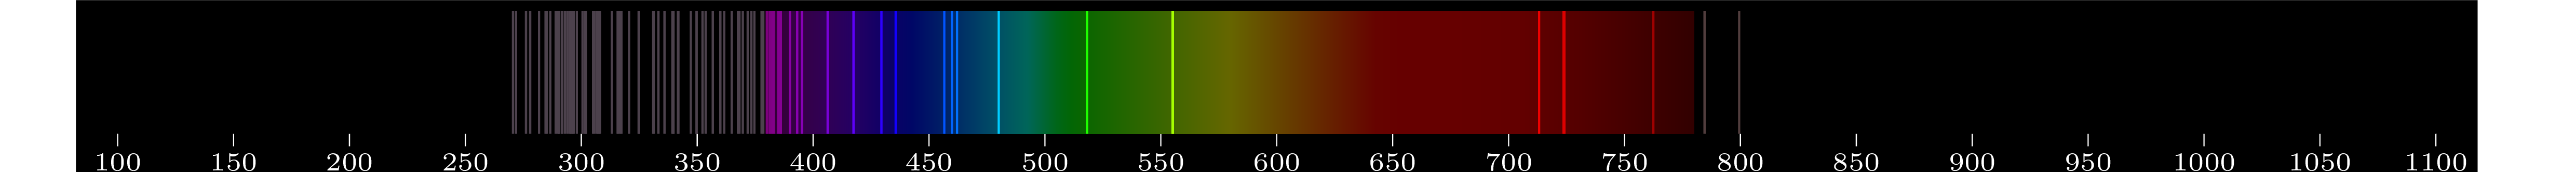 emmision spectra of element Hf